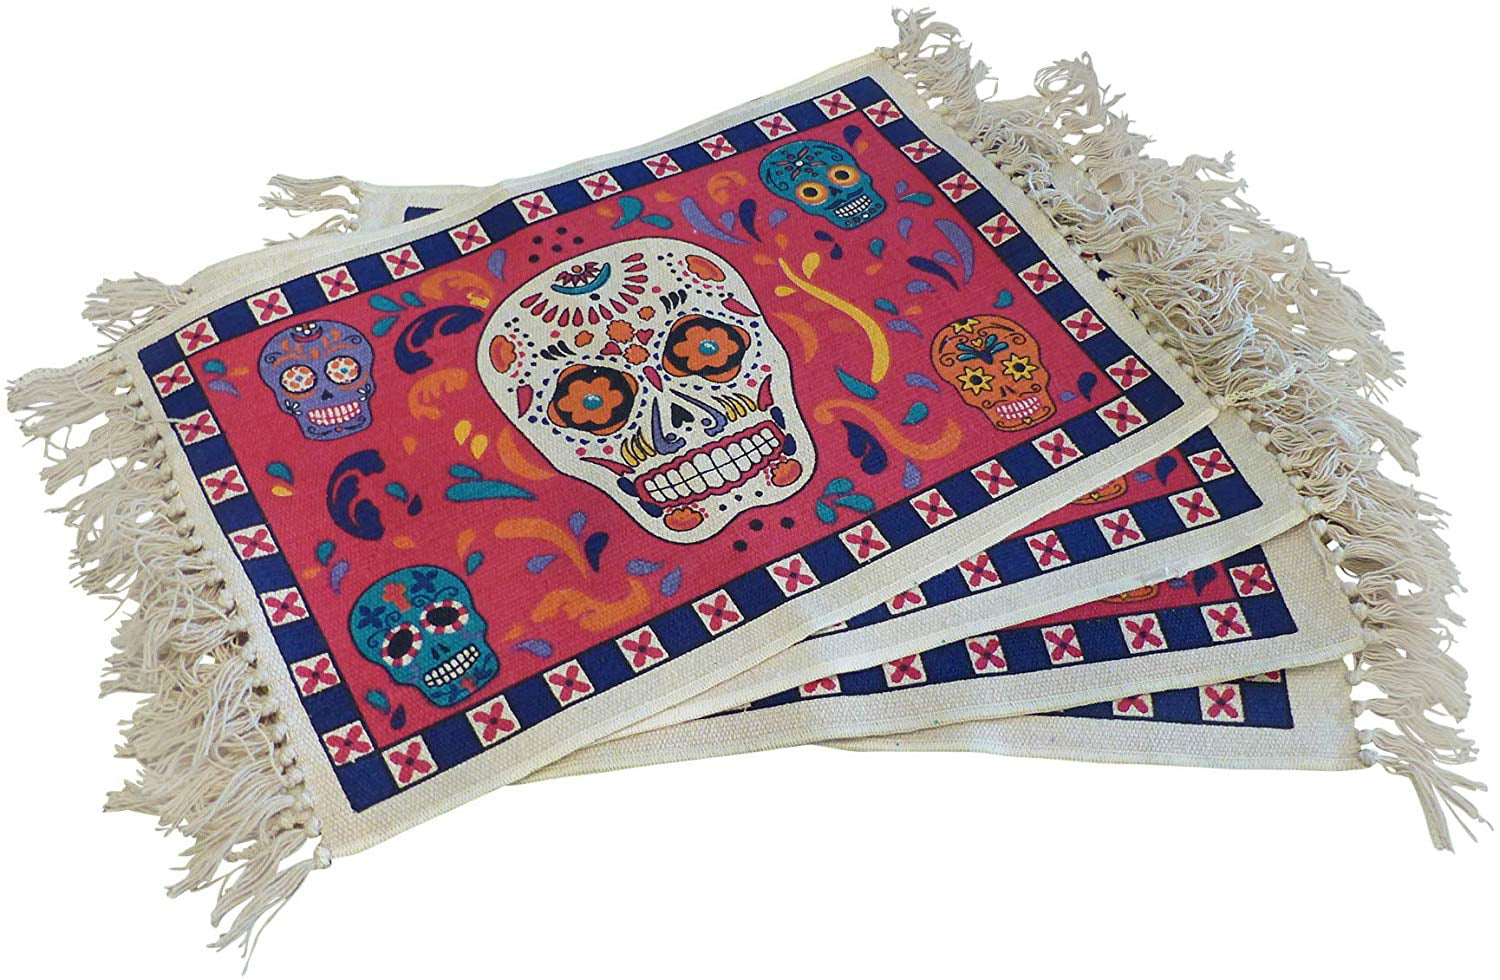 Sugar Skull Place Mats with Four Matching Cloth Napkins.